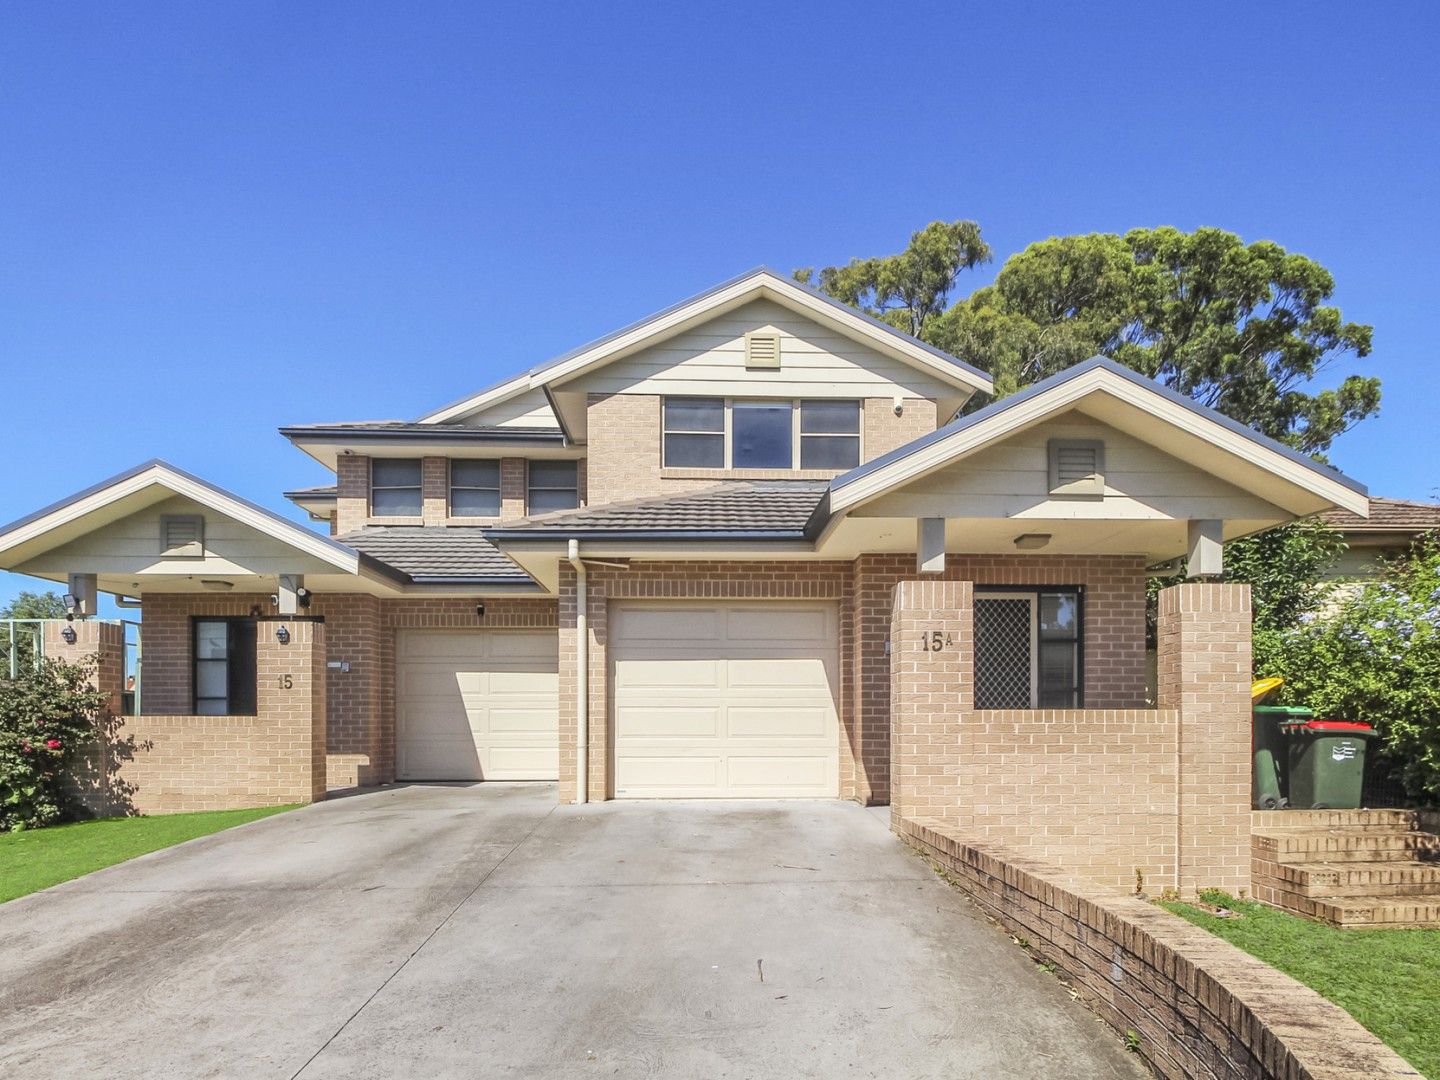 4 bedrooms Semi-Detached in 15A Mayfield Street WENTWORTHVILLE NSW, 2145